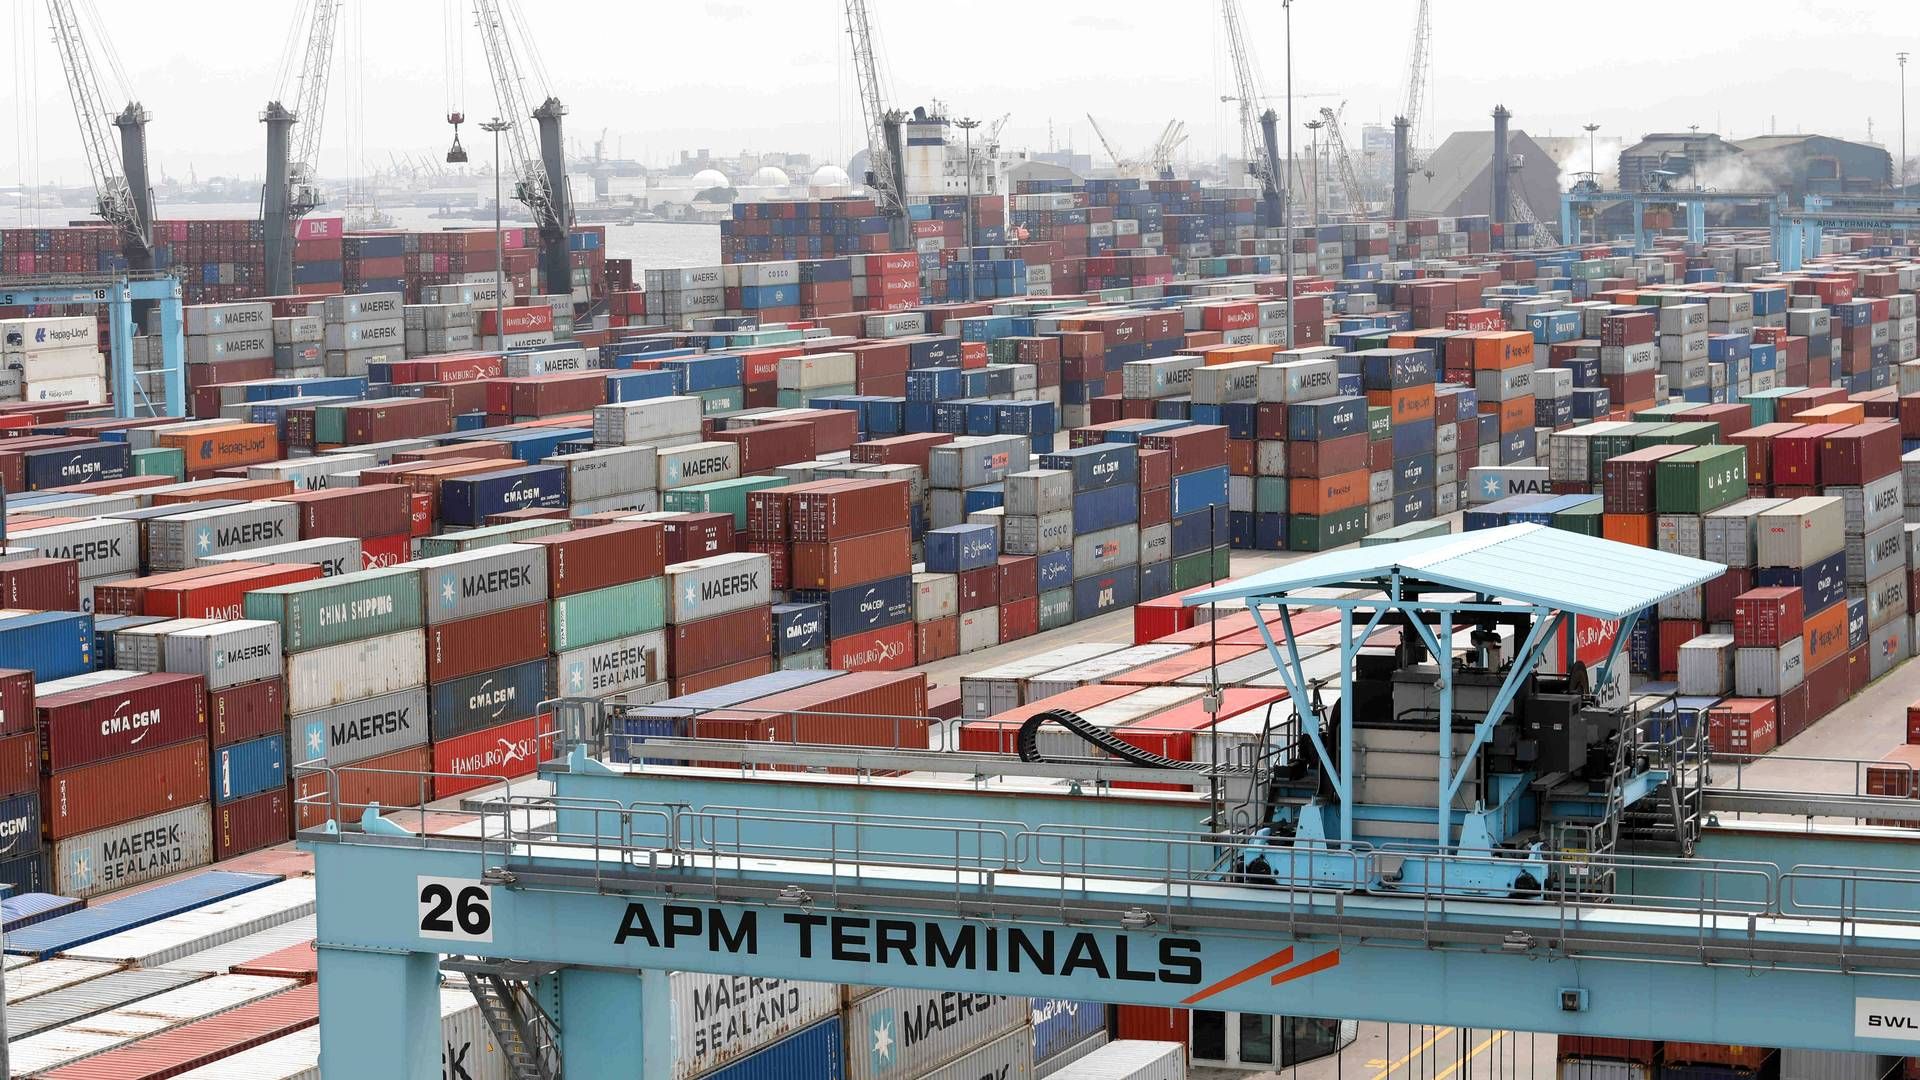 Maersk's port operator, APM Terminals, has increased the wages of employees in Monrovia, Liberia, after a years-long dispute over their pay. | Photo: Temilade Adelaja/Reuters/Ritzau Scanpix